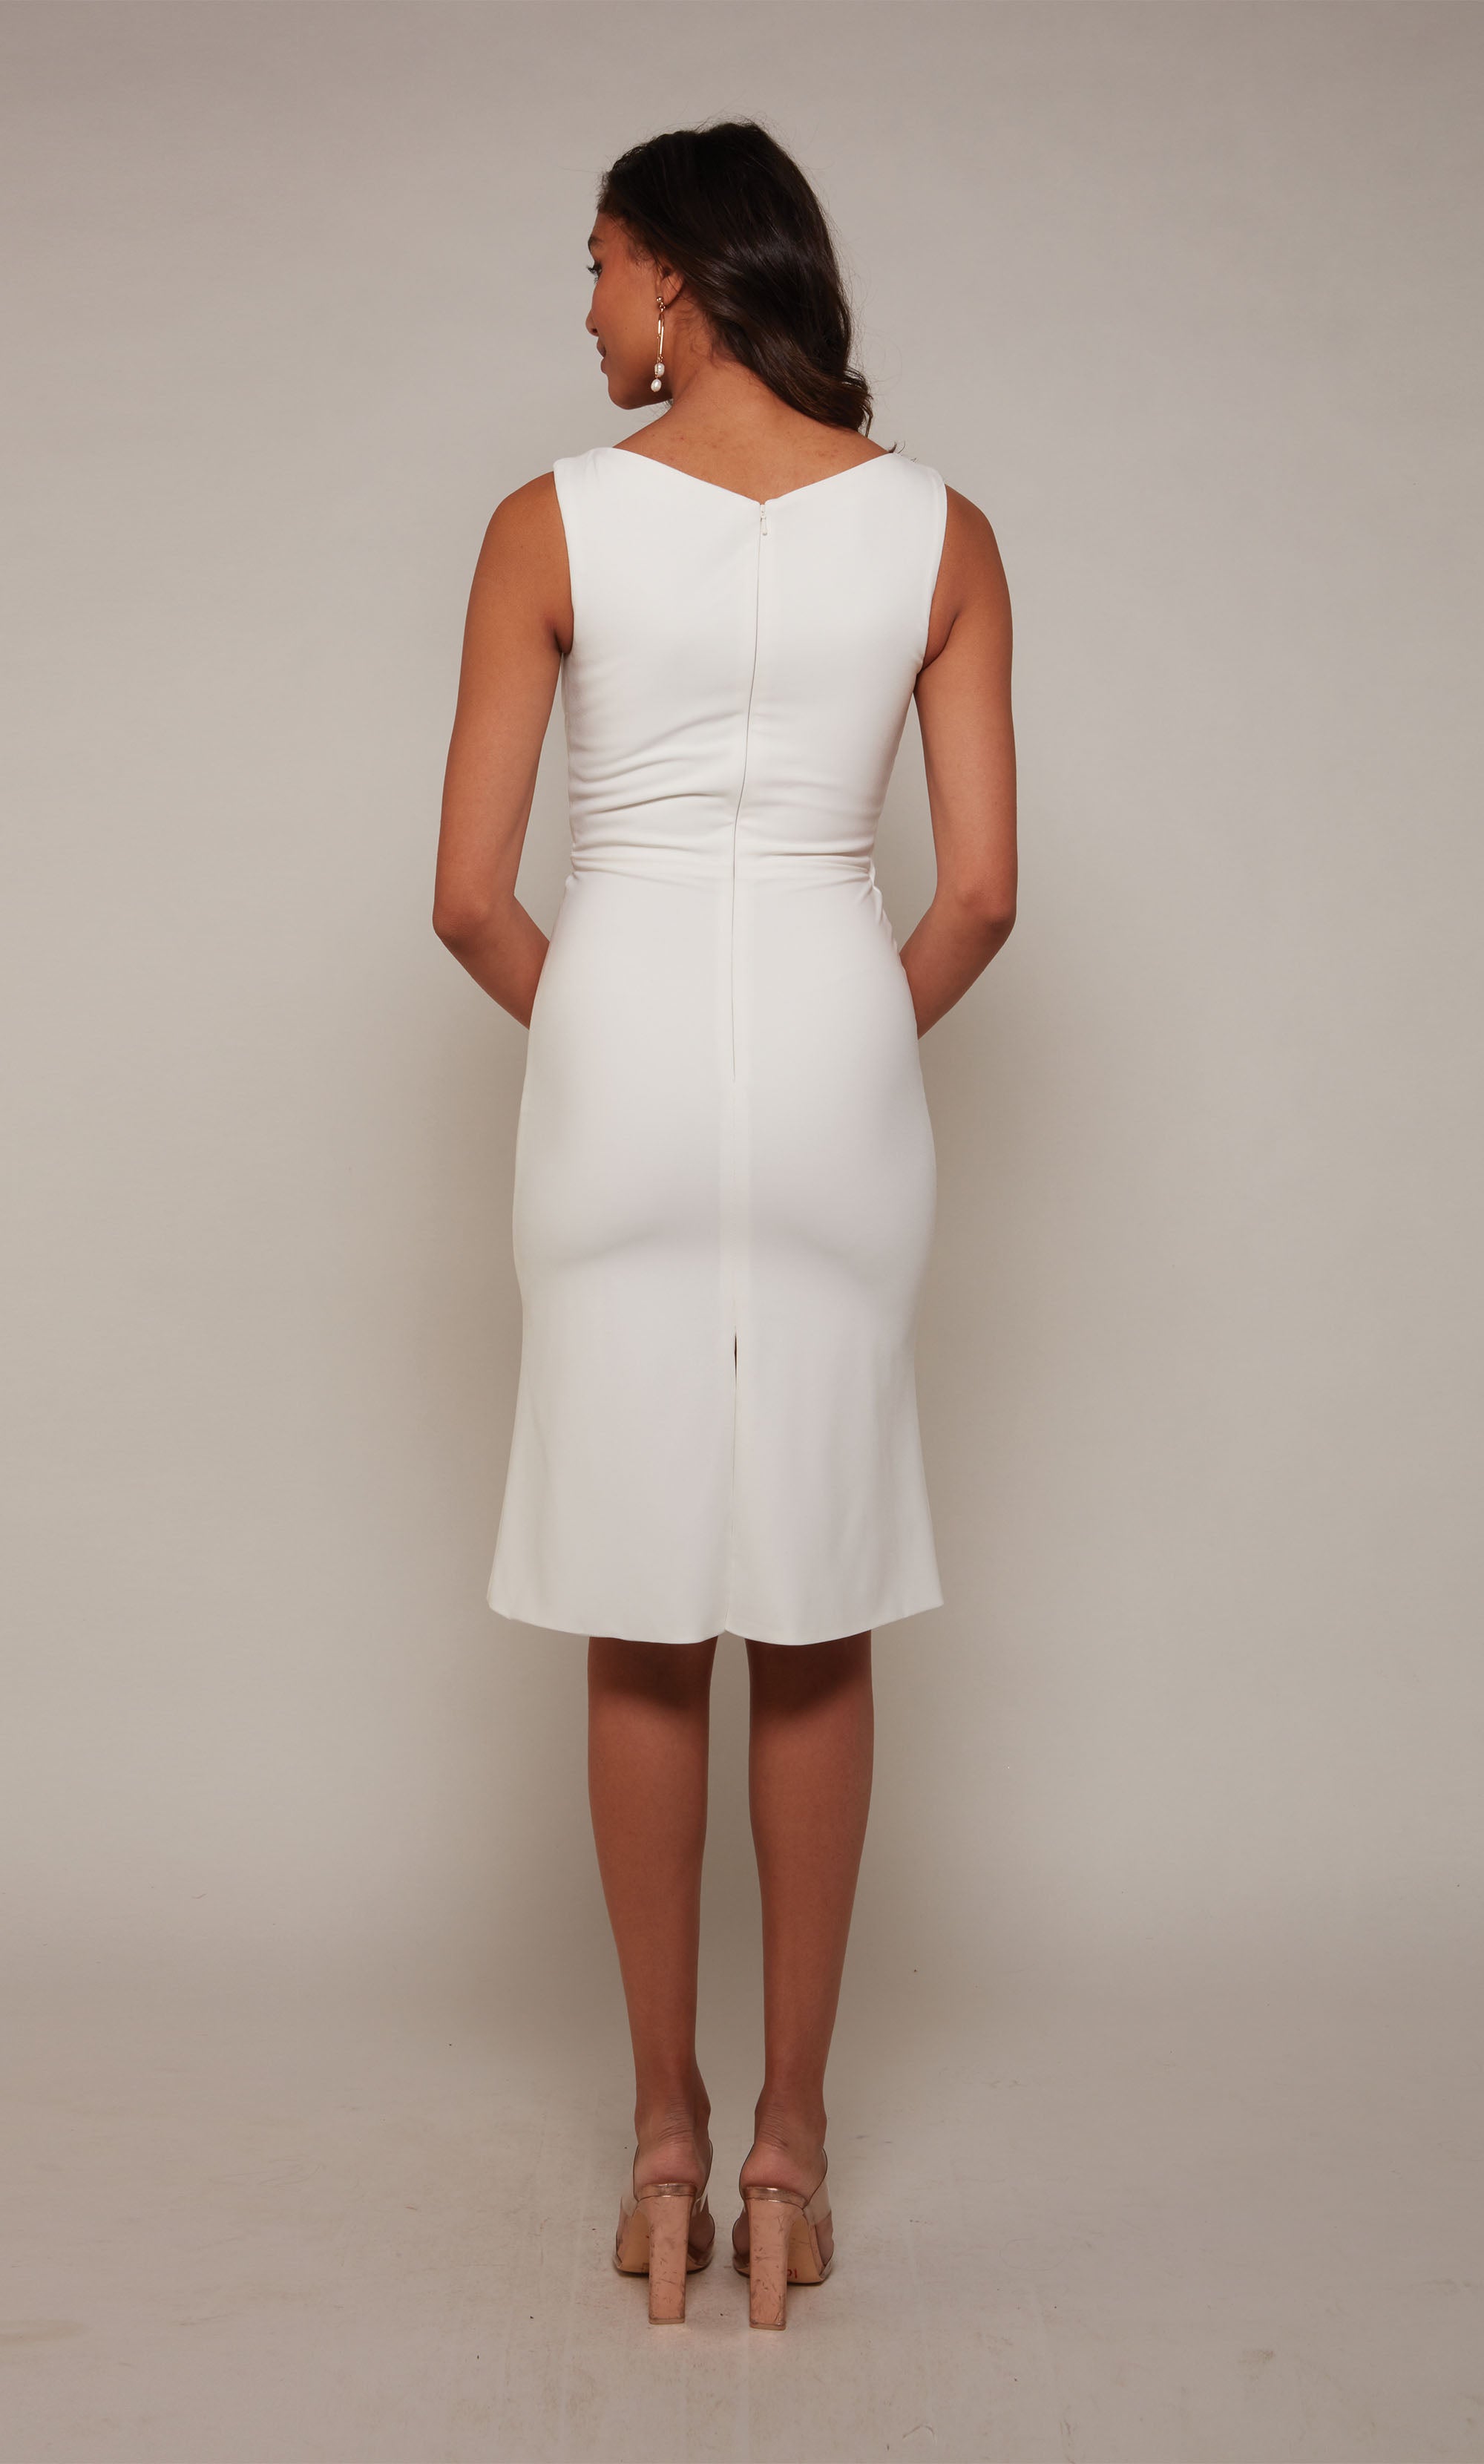 A sleeveless, ivory cocktail dress with an off center V-neckline and ruching detail. The skirt is fitted with a knee length hemline.